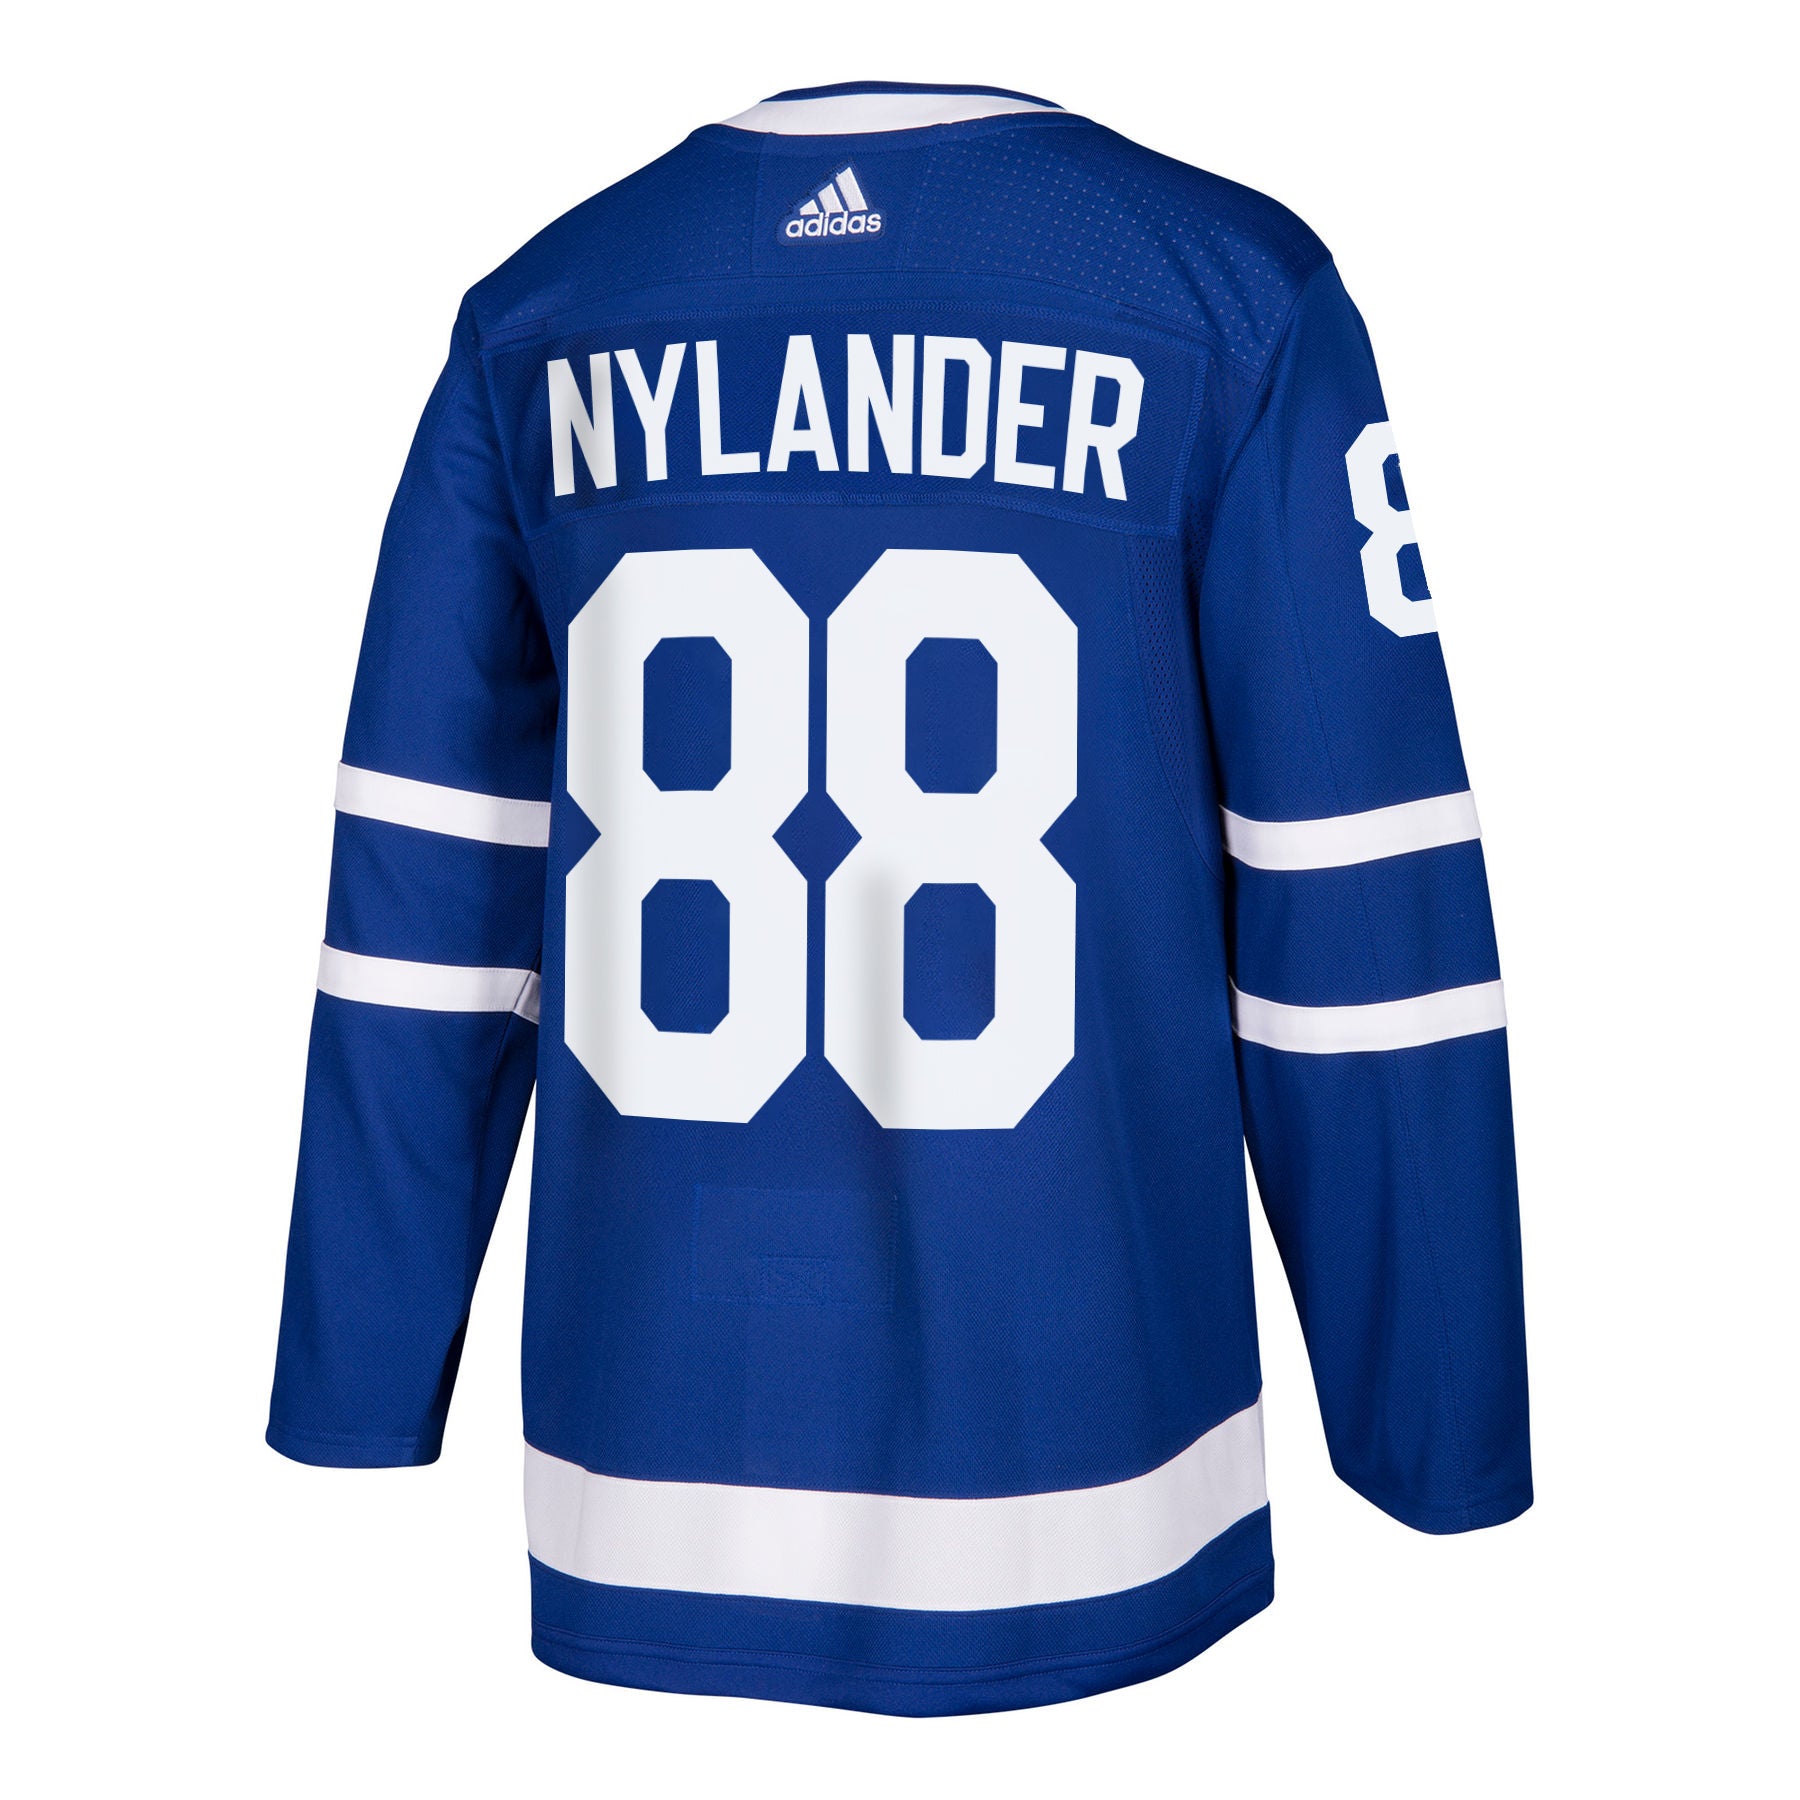 Maple Leafs Adidas Authentic Men's Home Jersey - NYLANDER ...